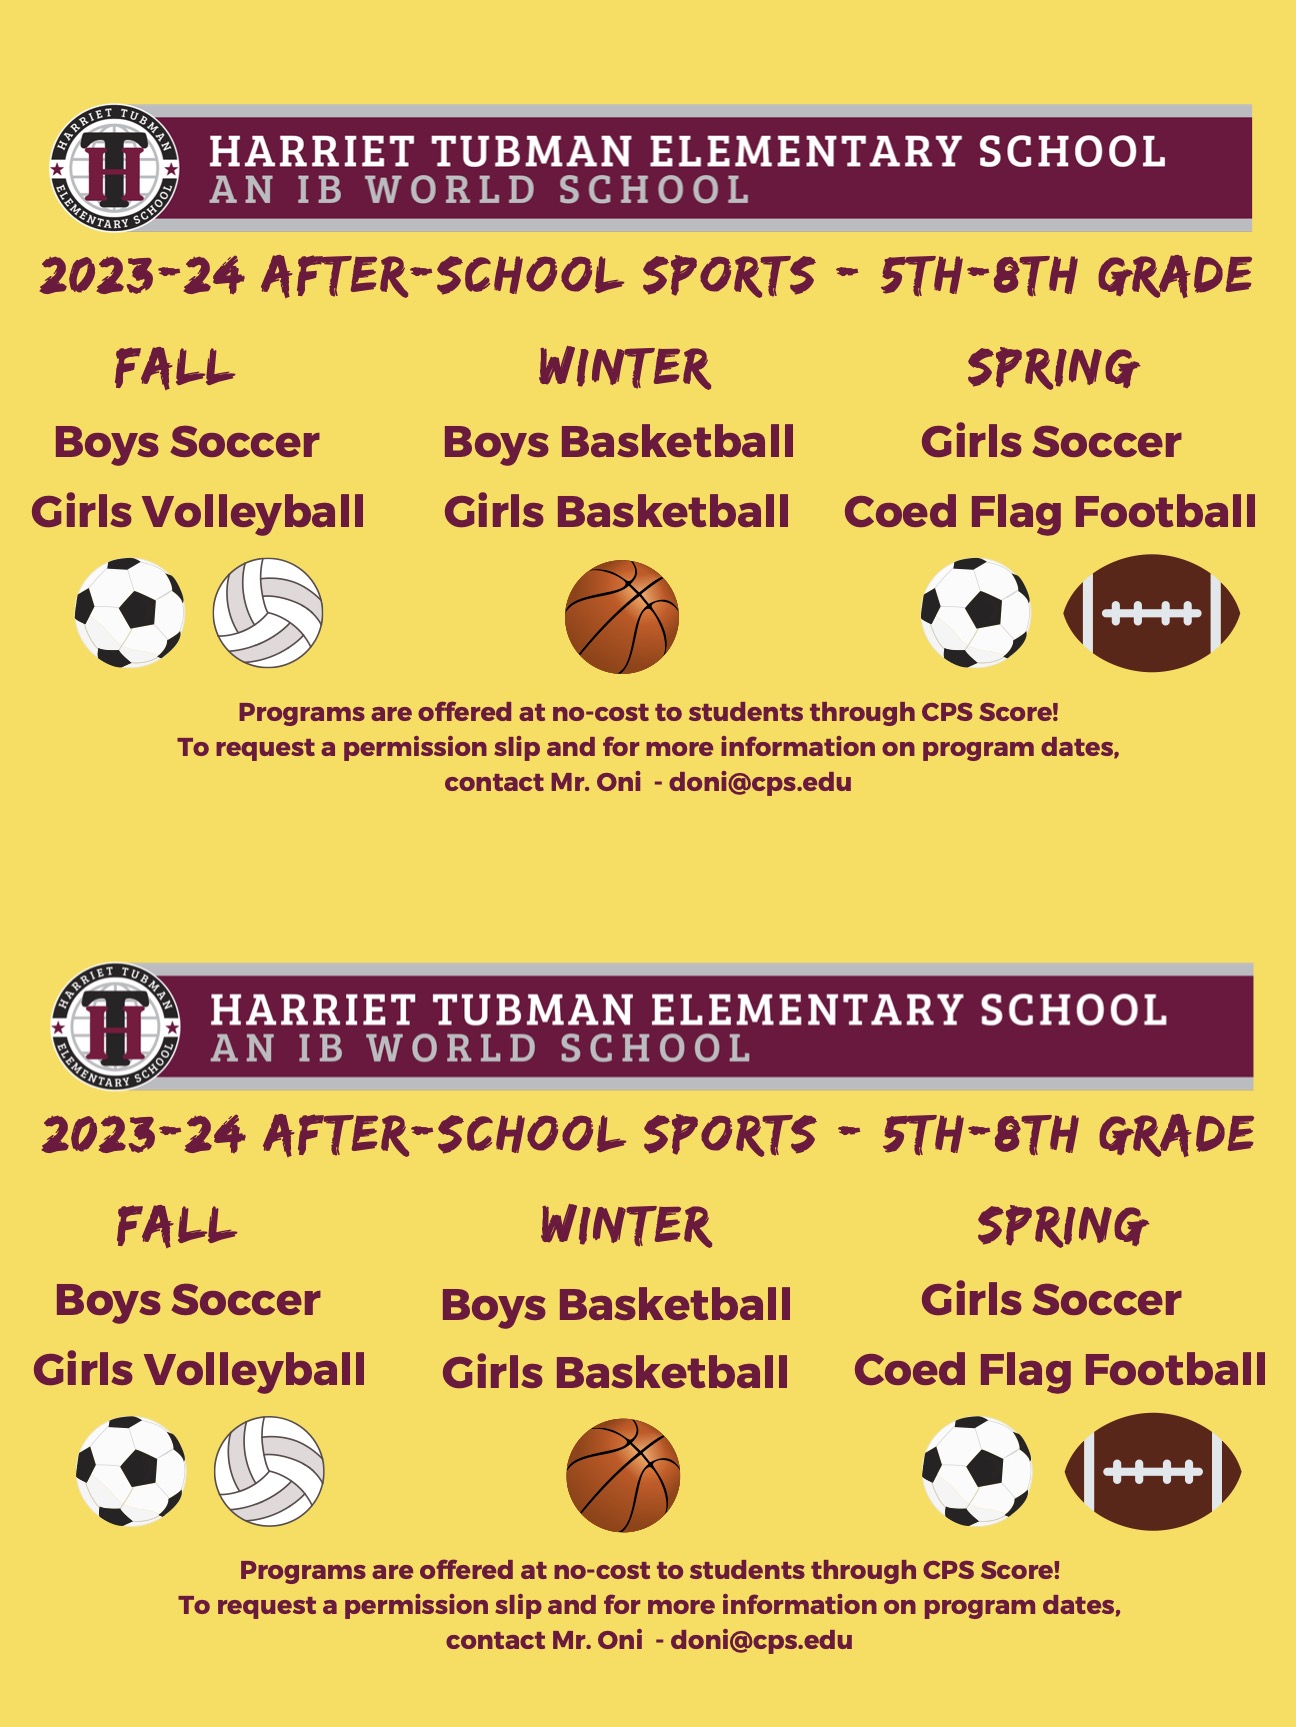 2023-24 After School Sports